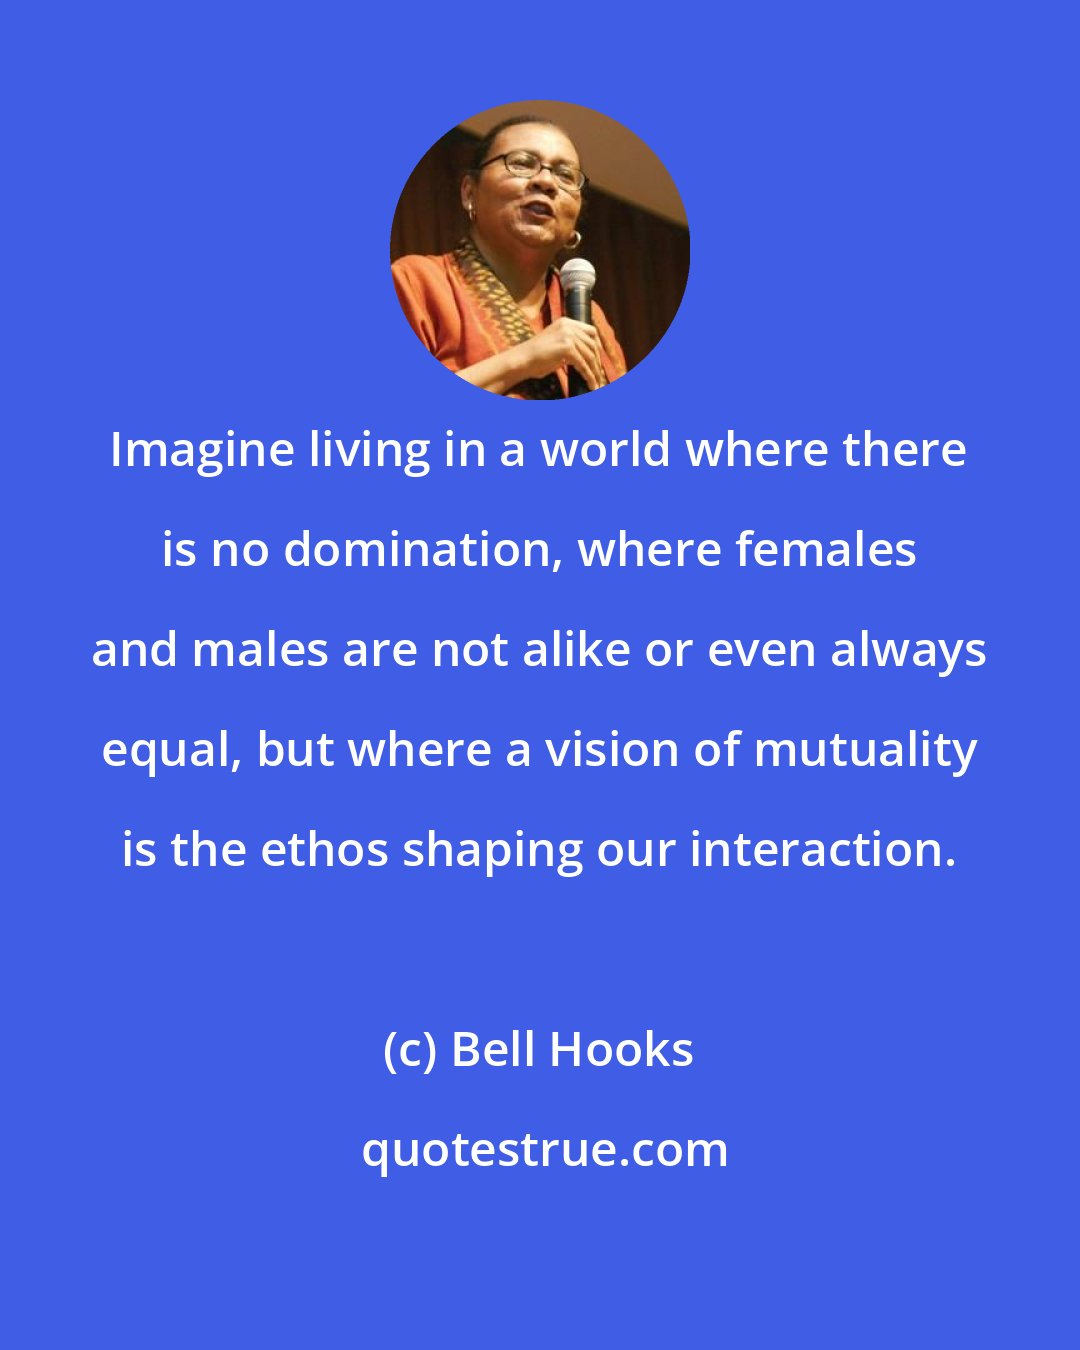 Bell Hooks: Imagine living in a world where there is no domination, where females and males are not alike or even always equal, but where a vision of mutuality is the ethos shaping our interaction.